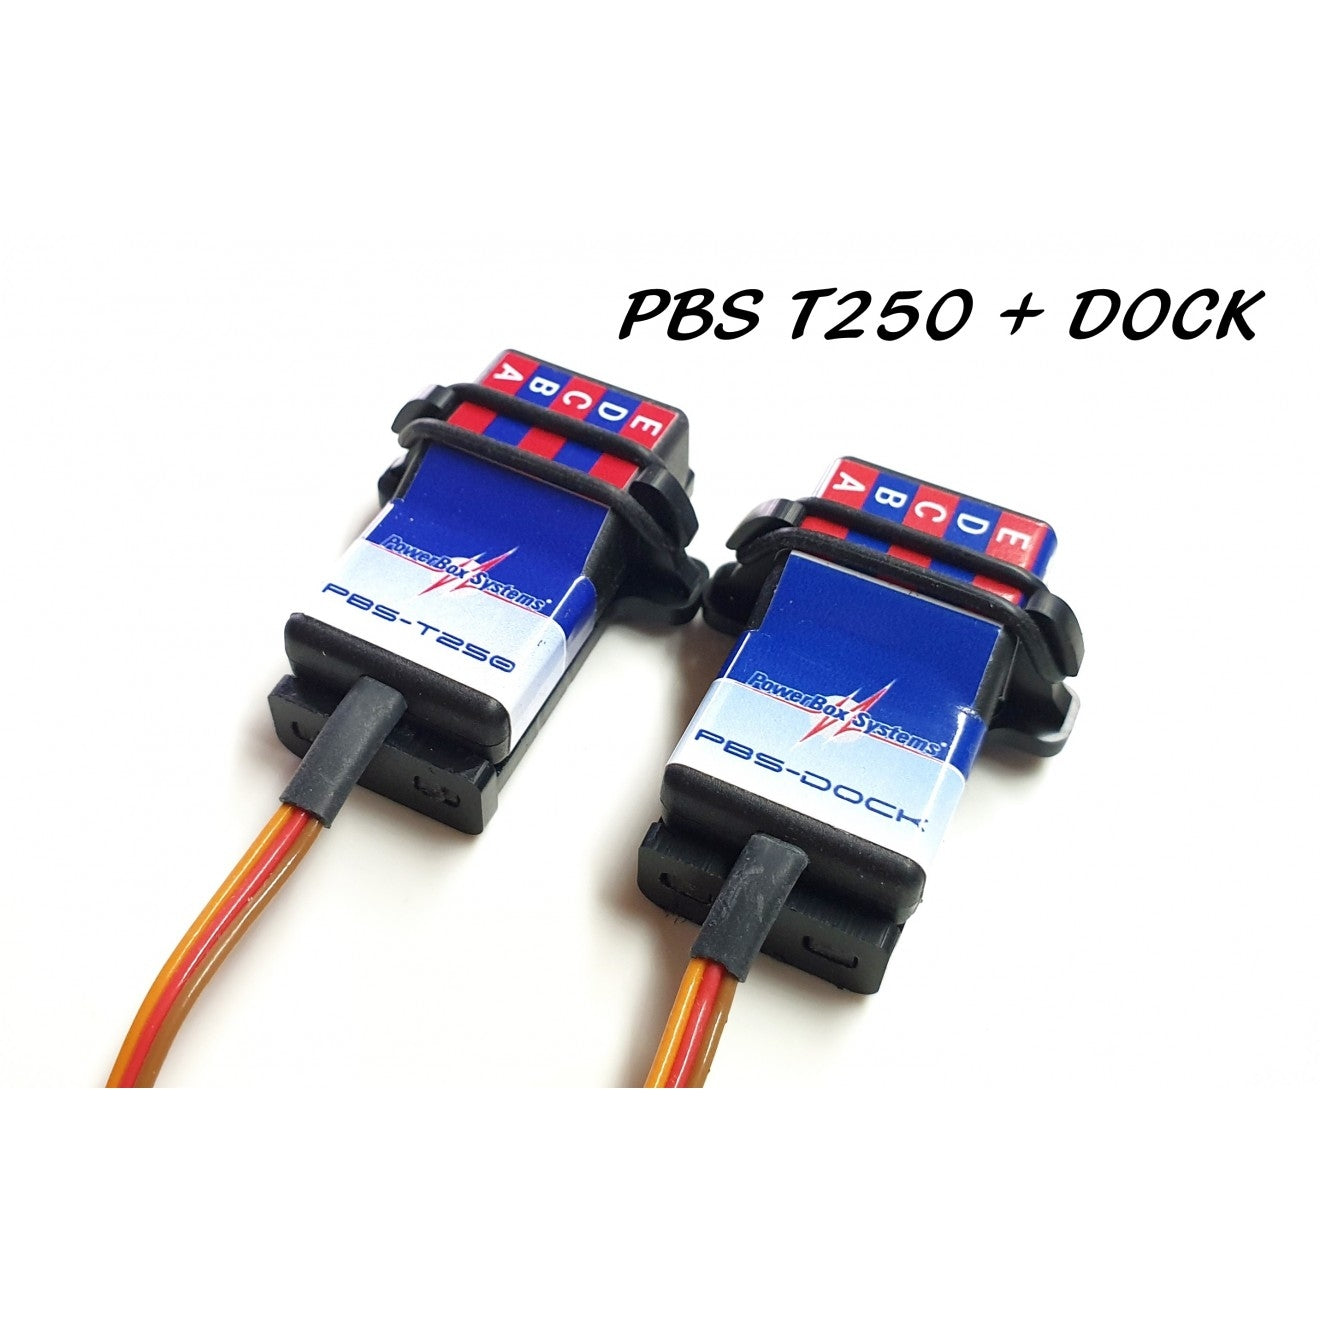 PowerBox Systems Click Holder for PBS T250 or DOCK from STV Tech 021-14